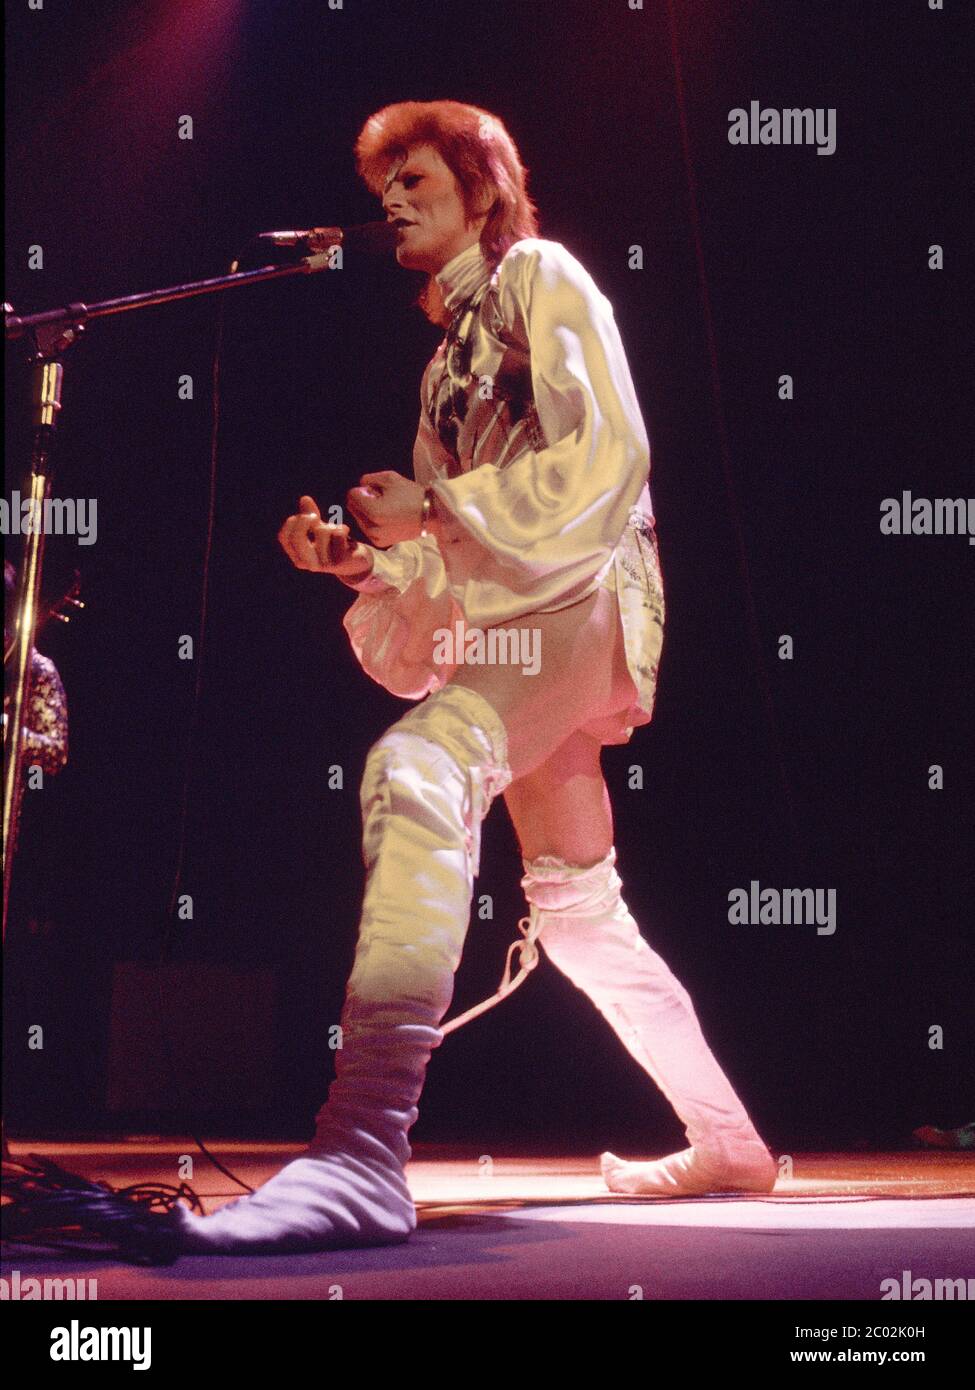 David Bowie as Ziggy Stardust in concert at Earl's Court Exhibition Hall,London 12th May 1973 Stock Photo